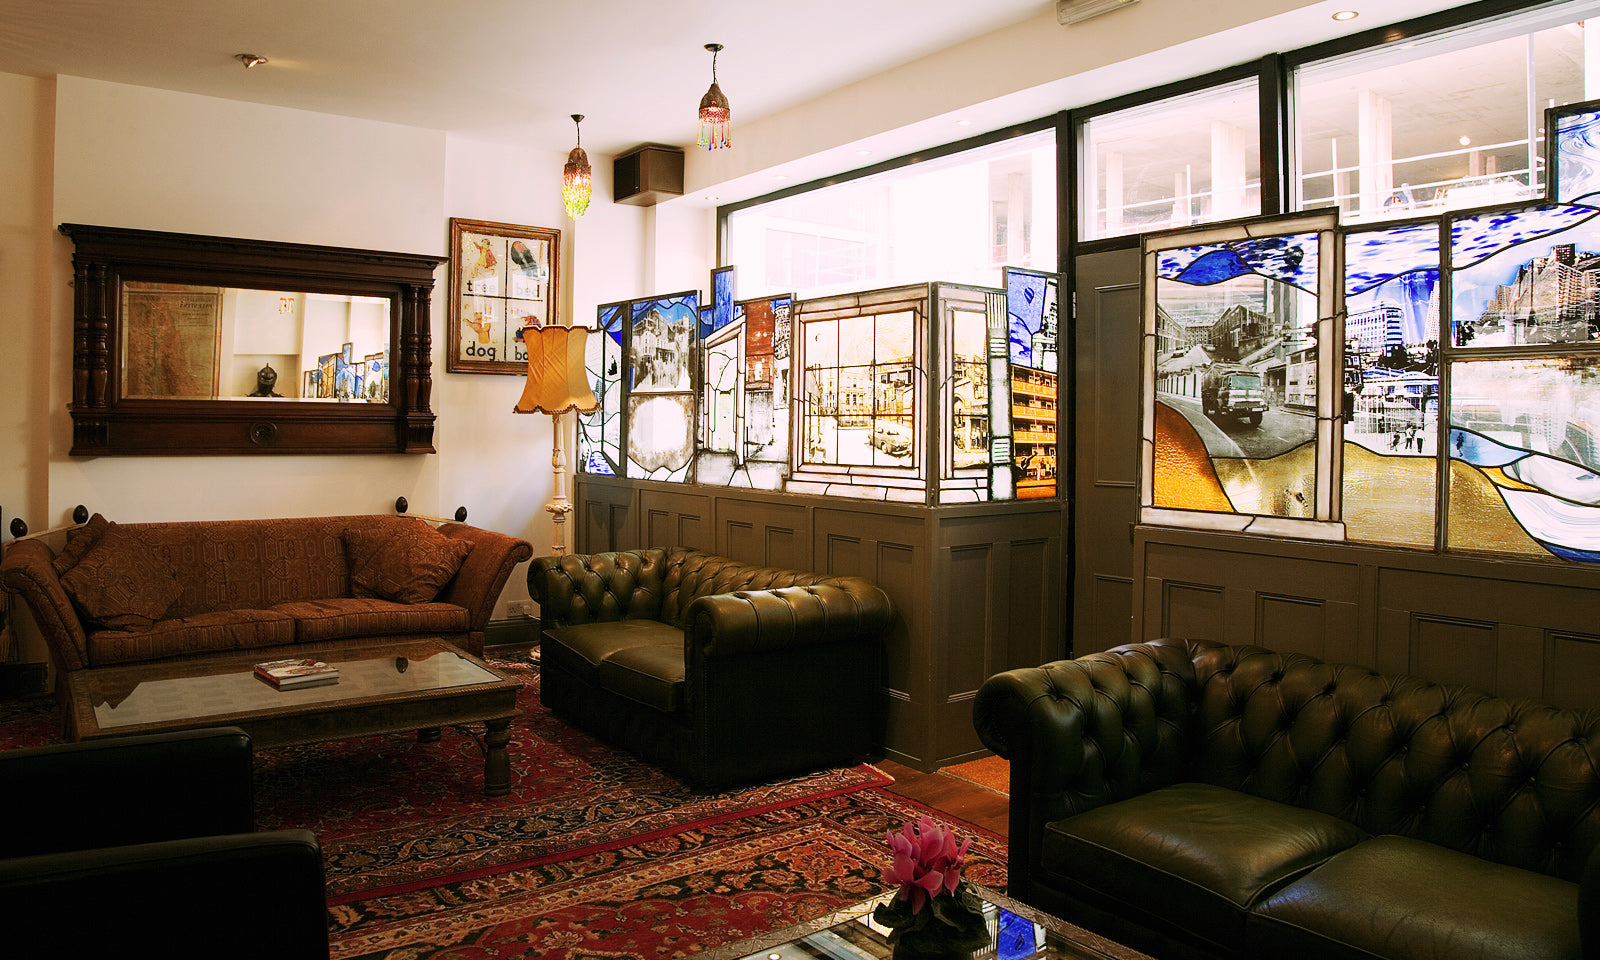 Painted glass windows in our upstairs lounge add warmth and atmosphere.